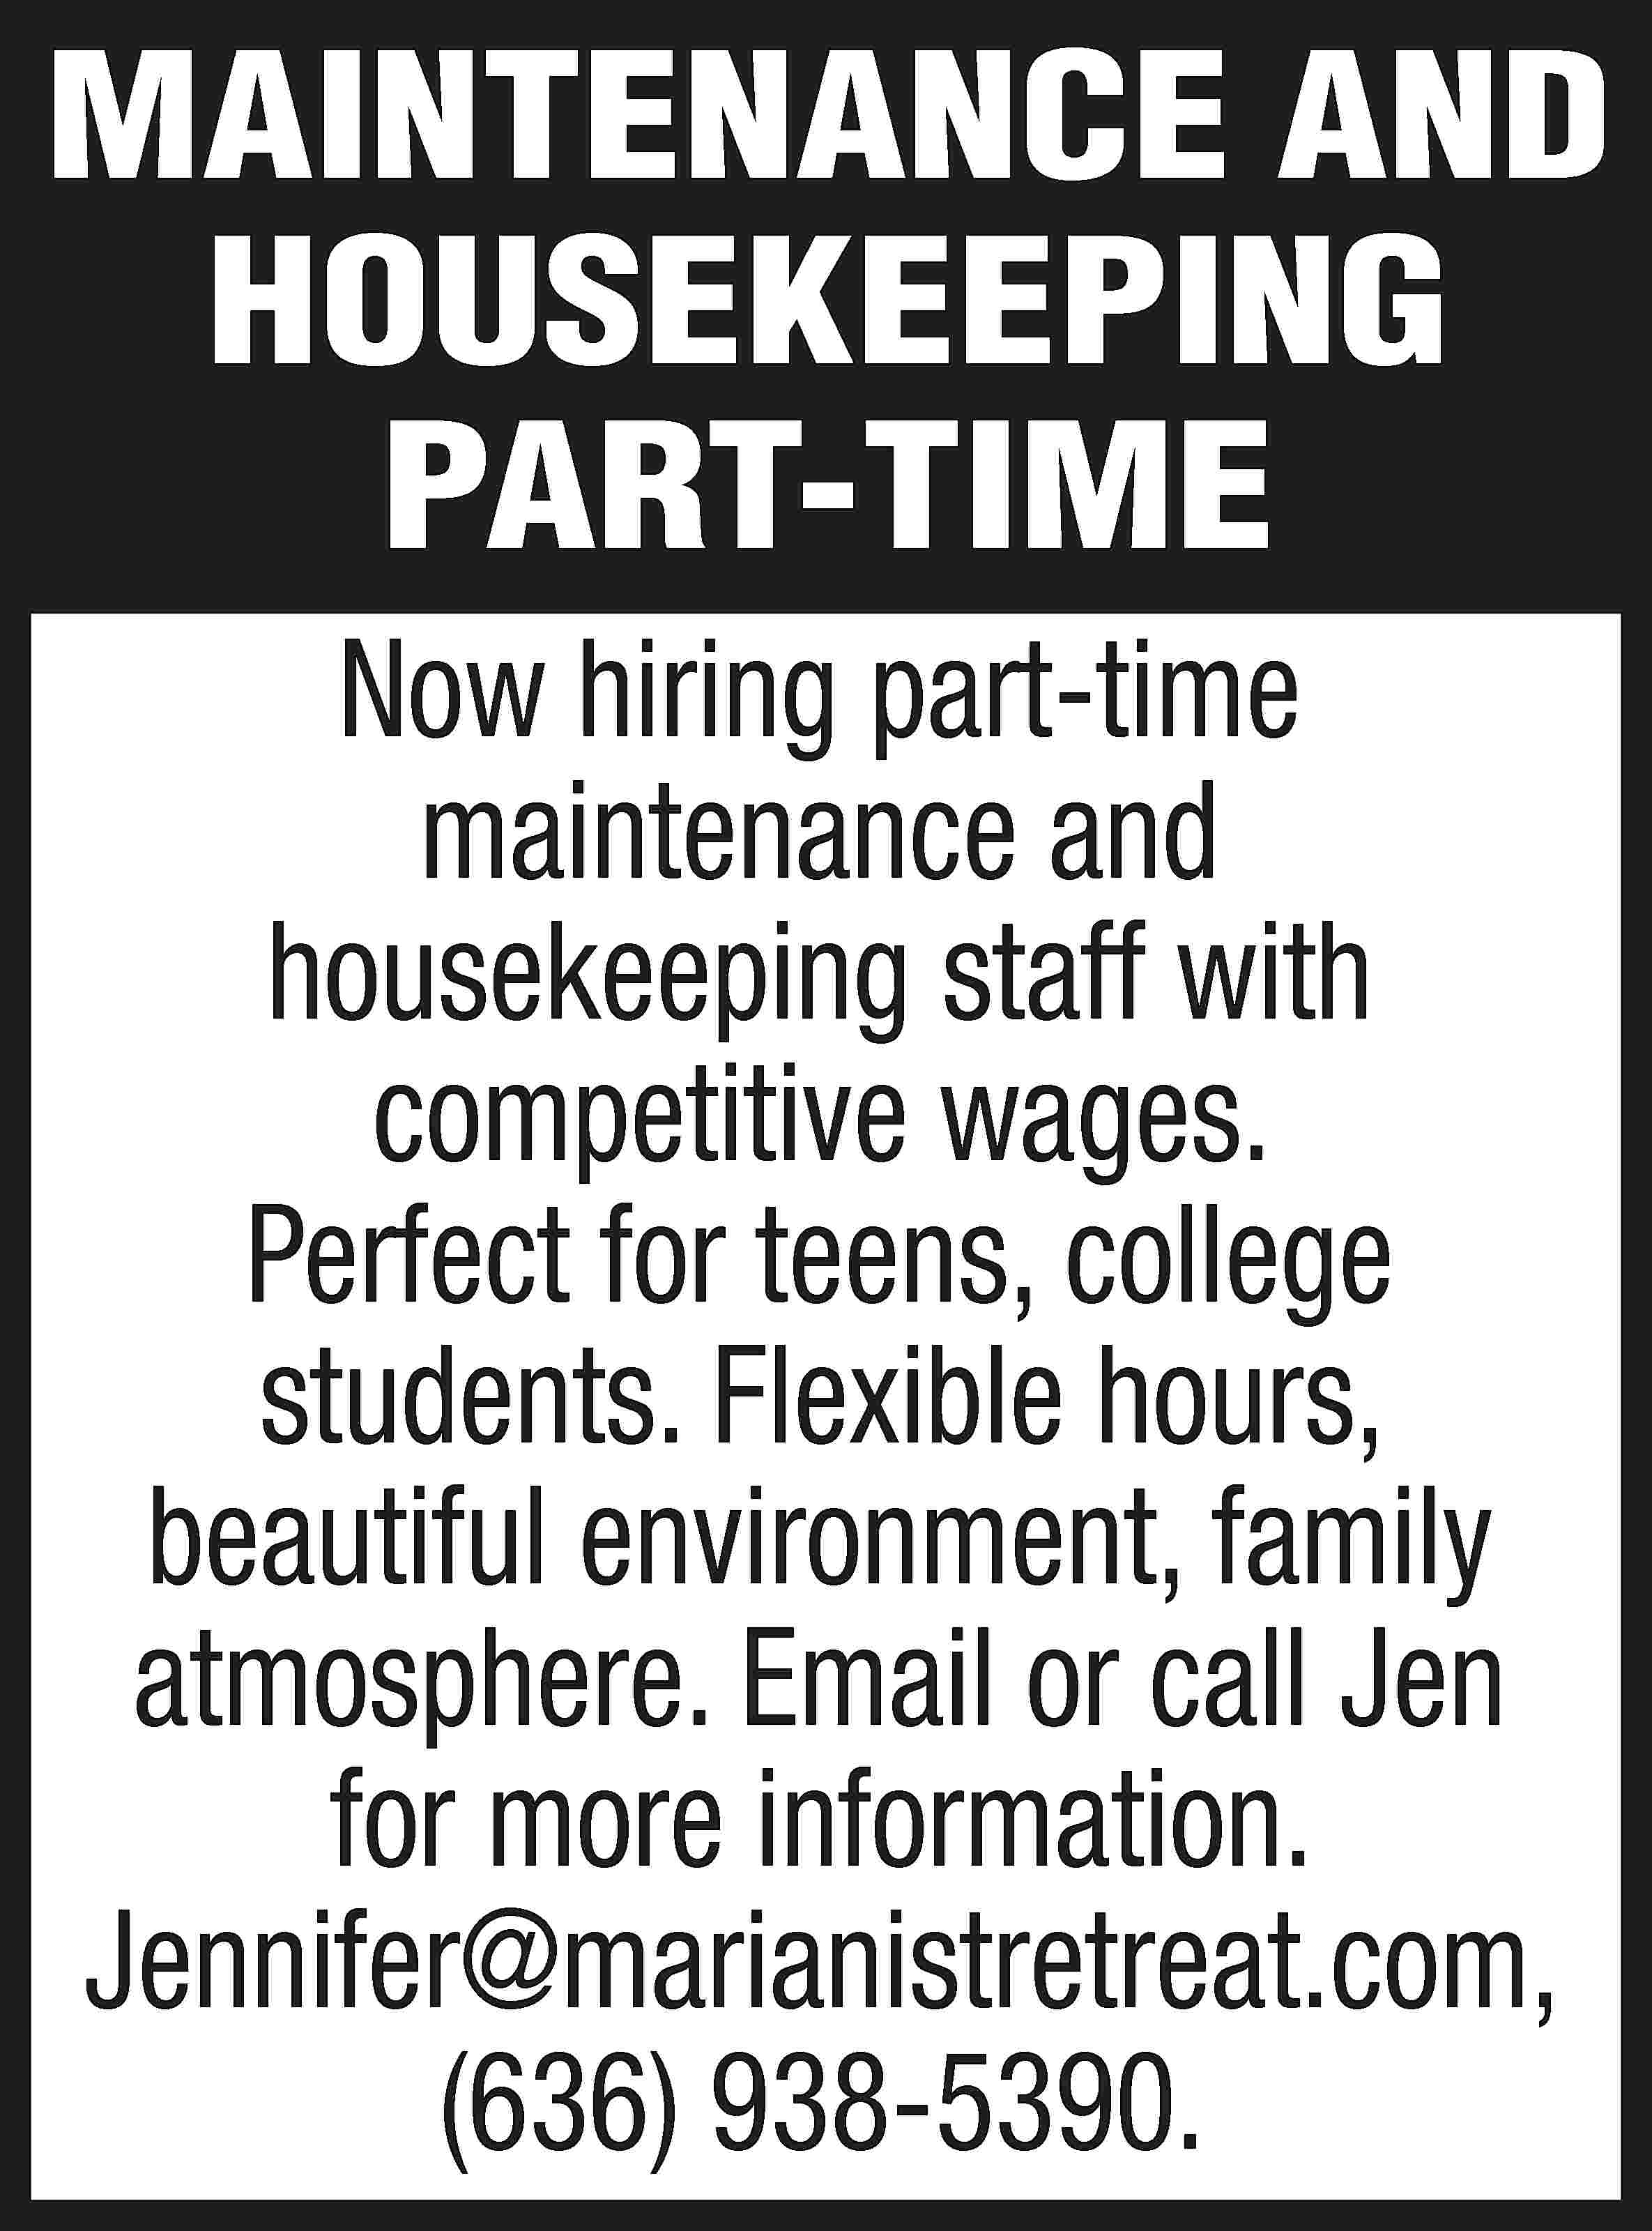 MAINTENANCE AND HOUSEKEEPING PART-TIME Now  MAINTENANCE AND HOUSEKEEPING PART-TIME Now hiring part-time maintenance and housekeeping staff with competitive wages. Perfect for teens, college students. Flexible hours, beautiful environment, family atmosphere. Email or call Jen for more information. Jennifer@marianistretreat.com, (636) 938-5390.